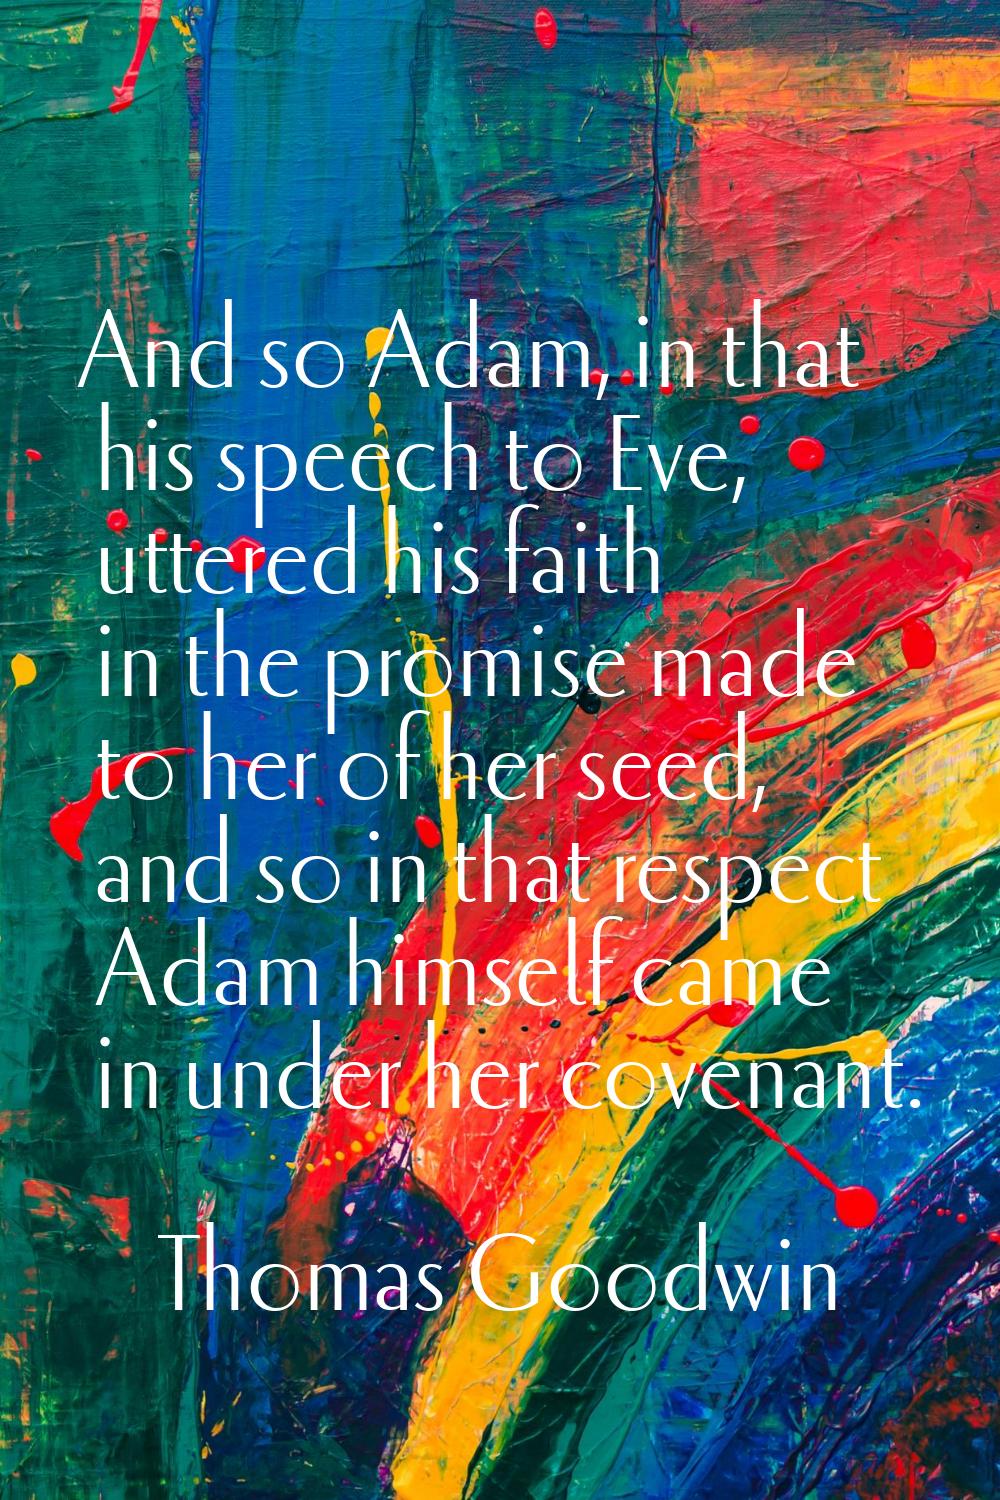 And so Adam, in that his speech to Eve, uttered his faith in the promise made to her of her seed, a